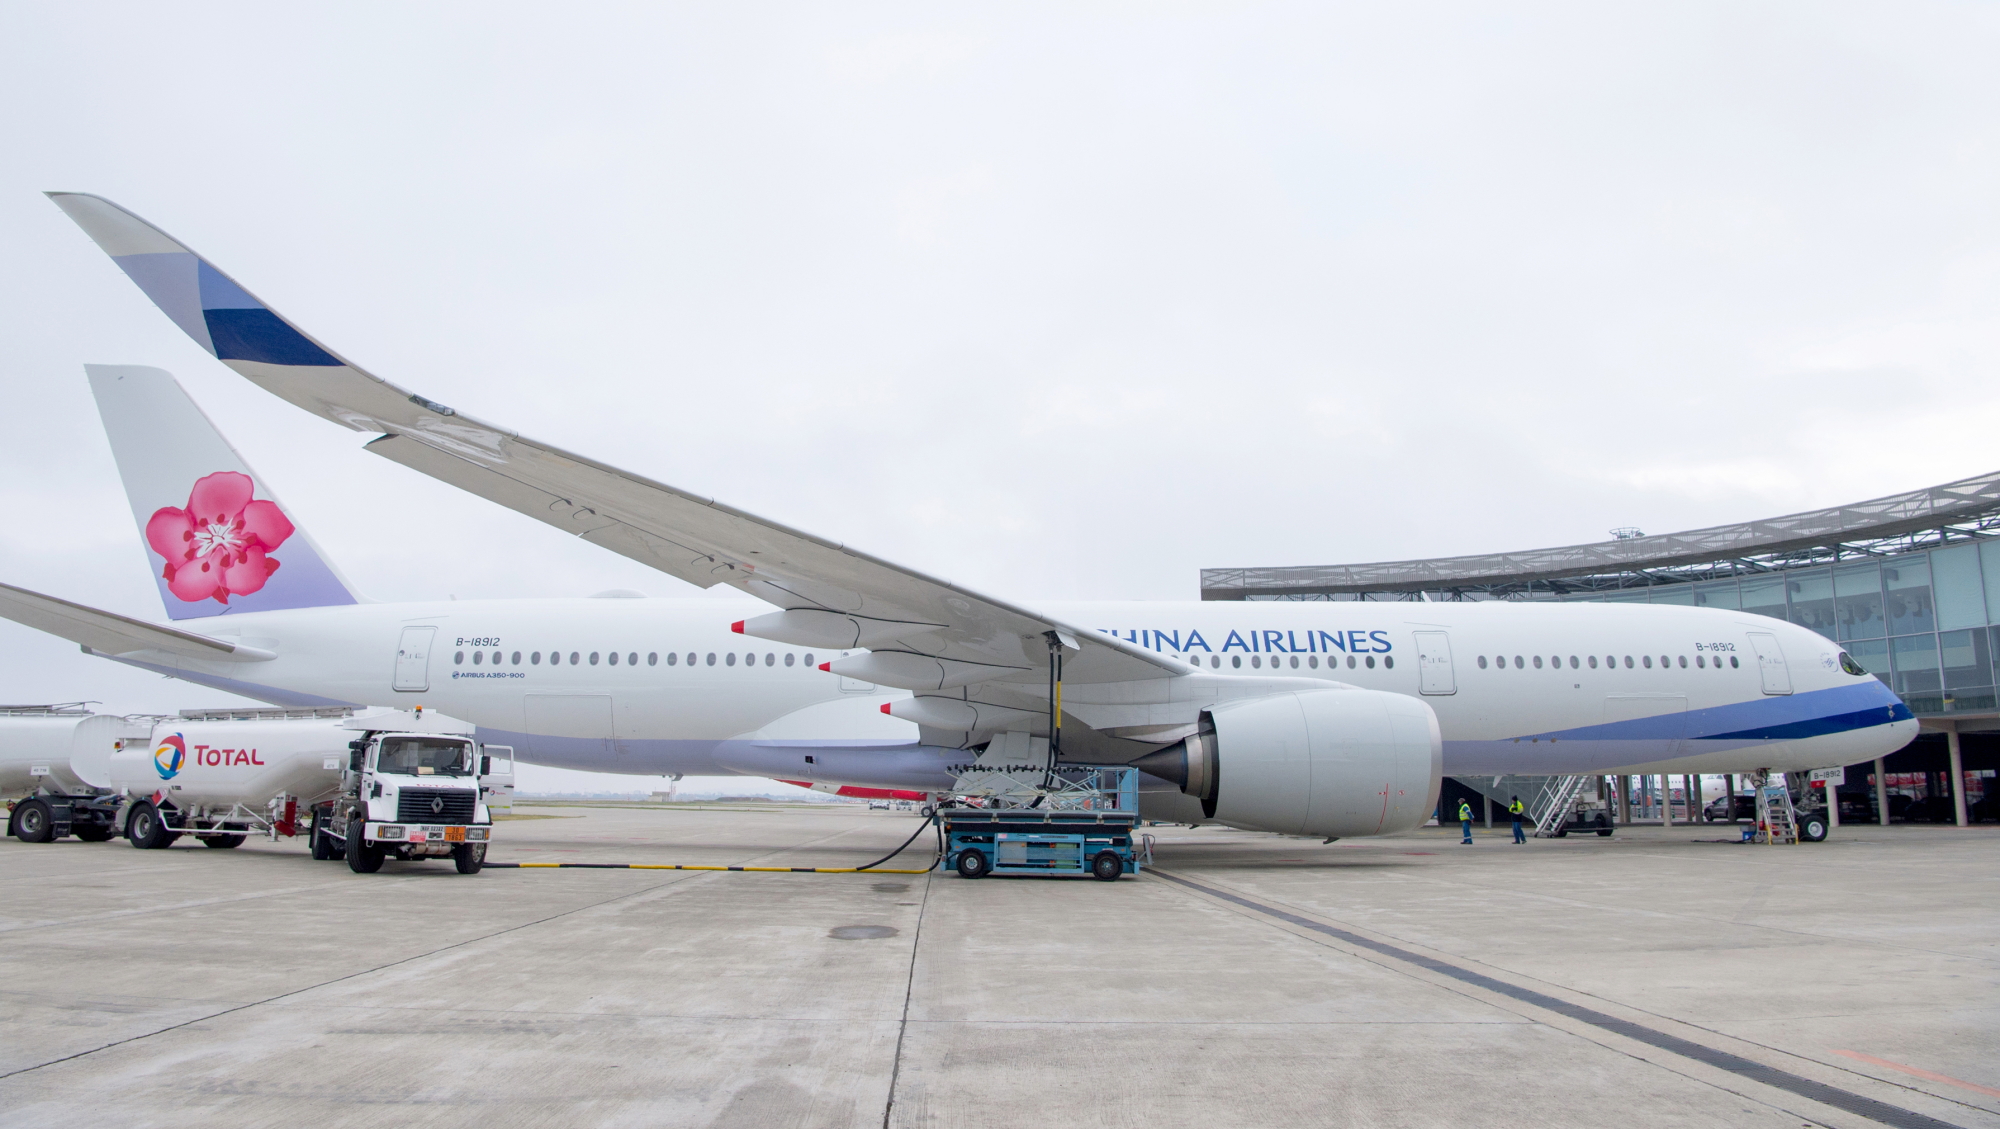 The 10th China Airlines Airbus A350 aircraft, which took off for Taipei from Toulouse on Thursday, is using Sustainable Aviation/Alternative Fuels (SAF) to reduce its carbon dioxide emissions by around 20,000 kg. Click to enlarge.